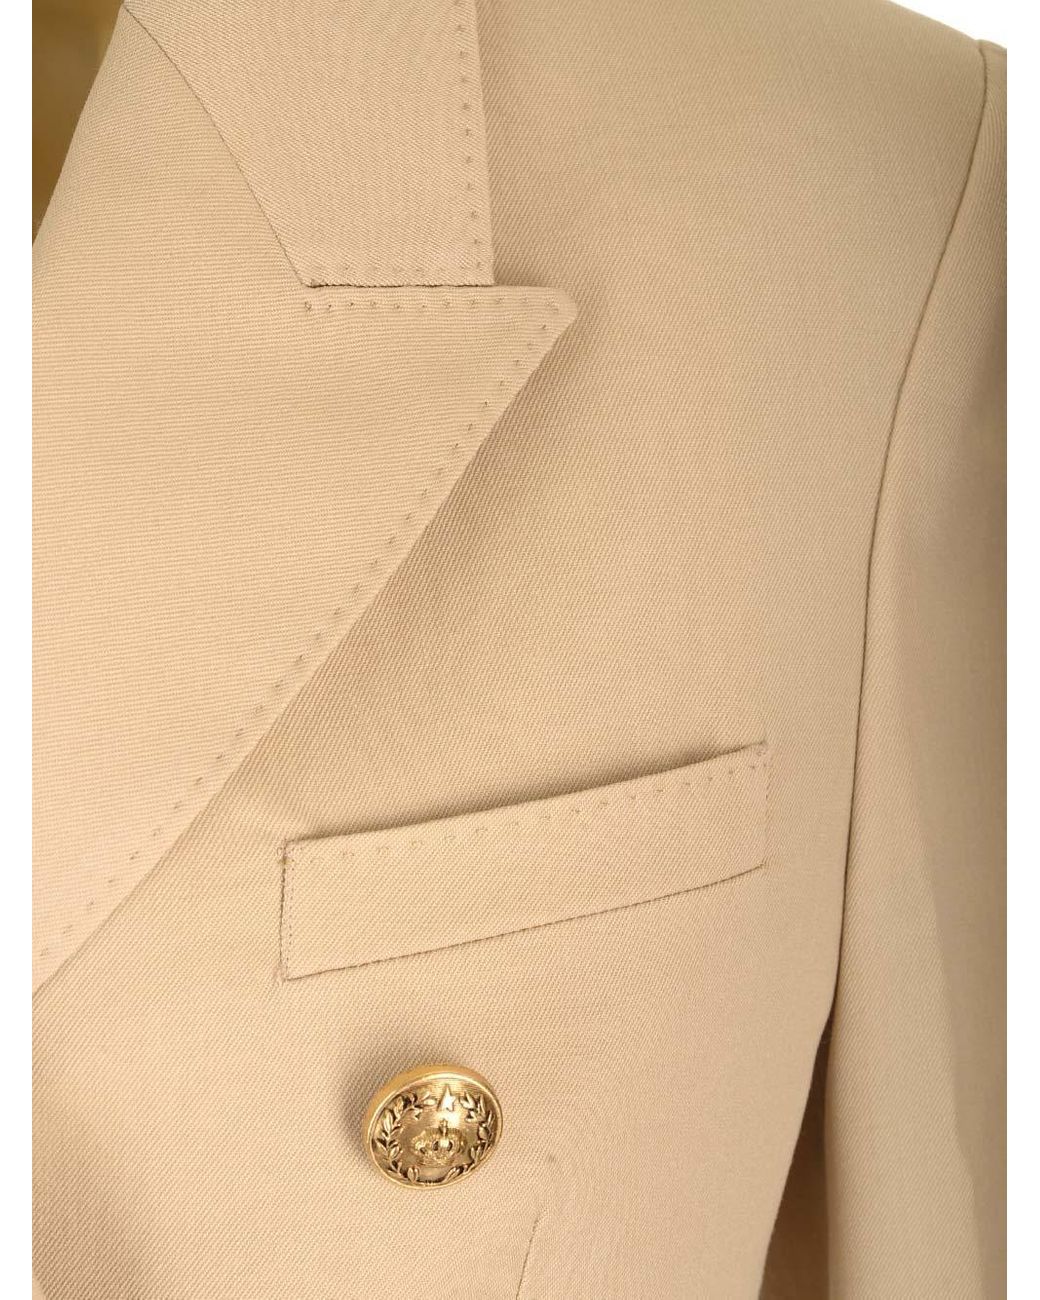 Women's double-breasted blazer in sand with gold heraldic buttons